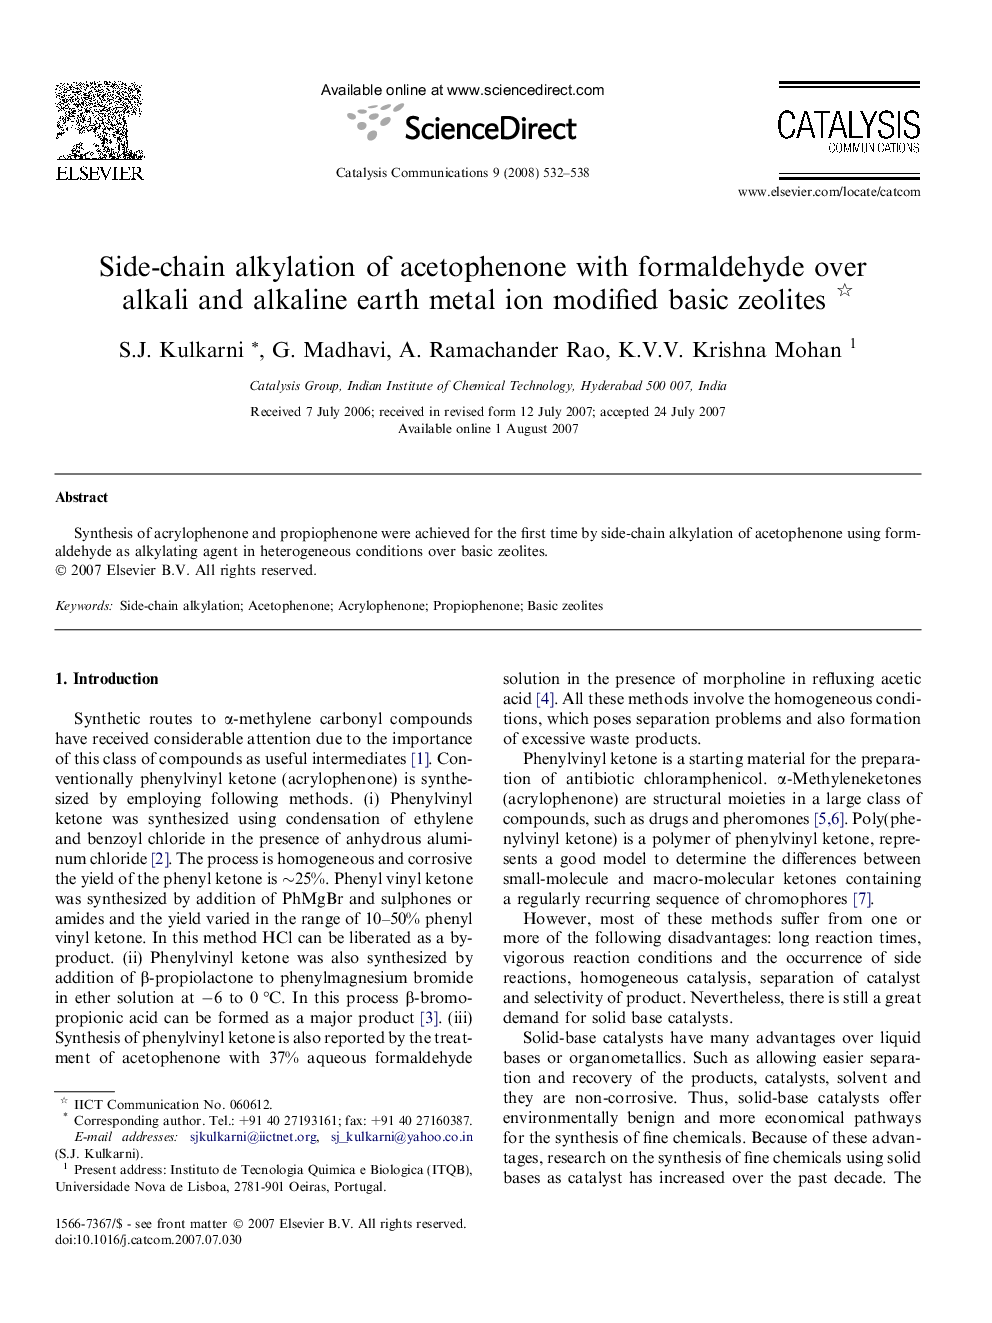 Side-chain alkylation of acetophenone with formaldehyde over alkali and alkaline earth metal ion modified basic zeolites 